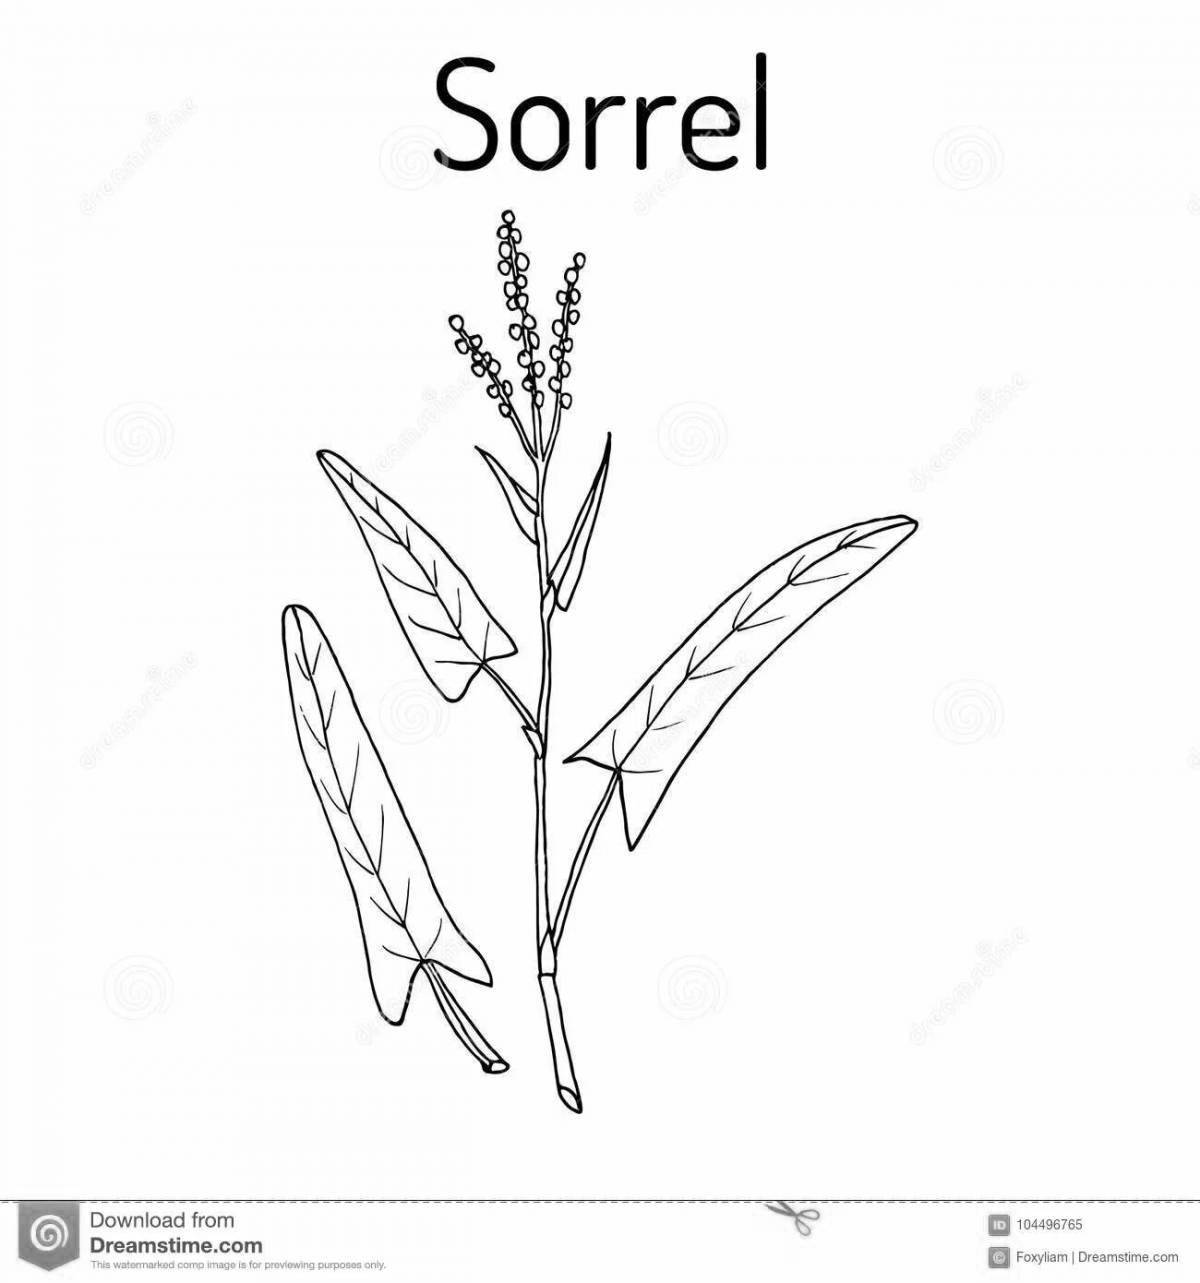 Adorable sorrel coloring page for students